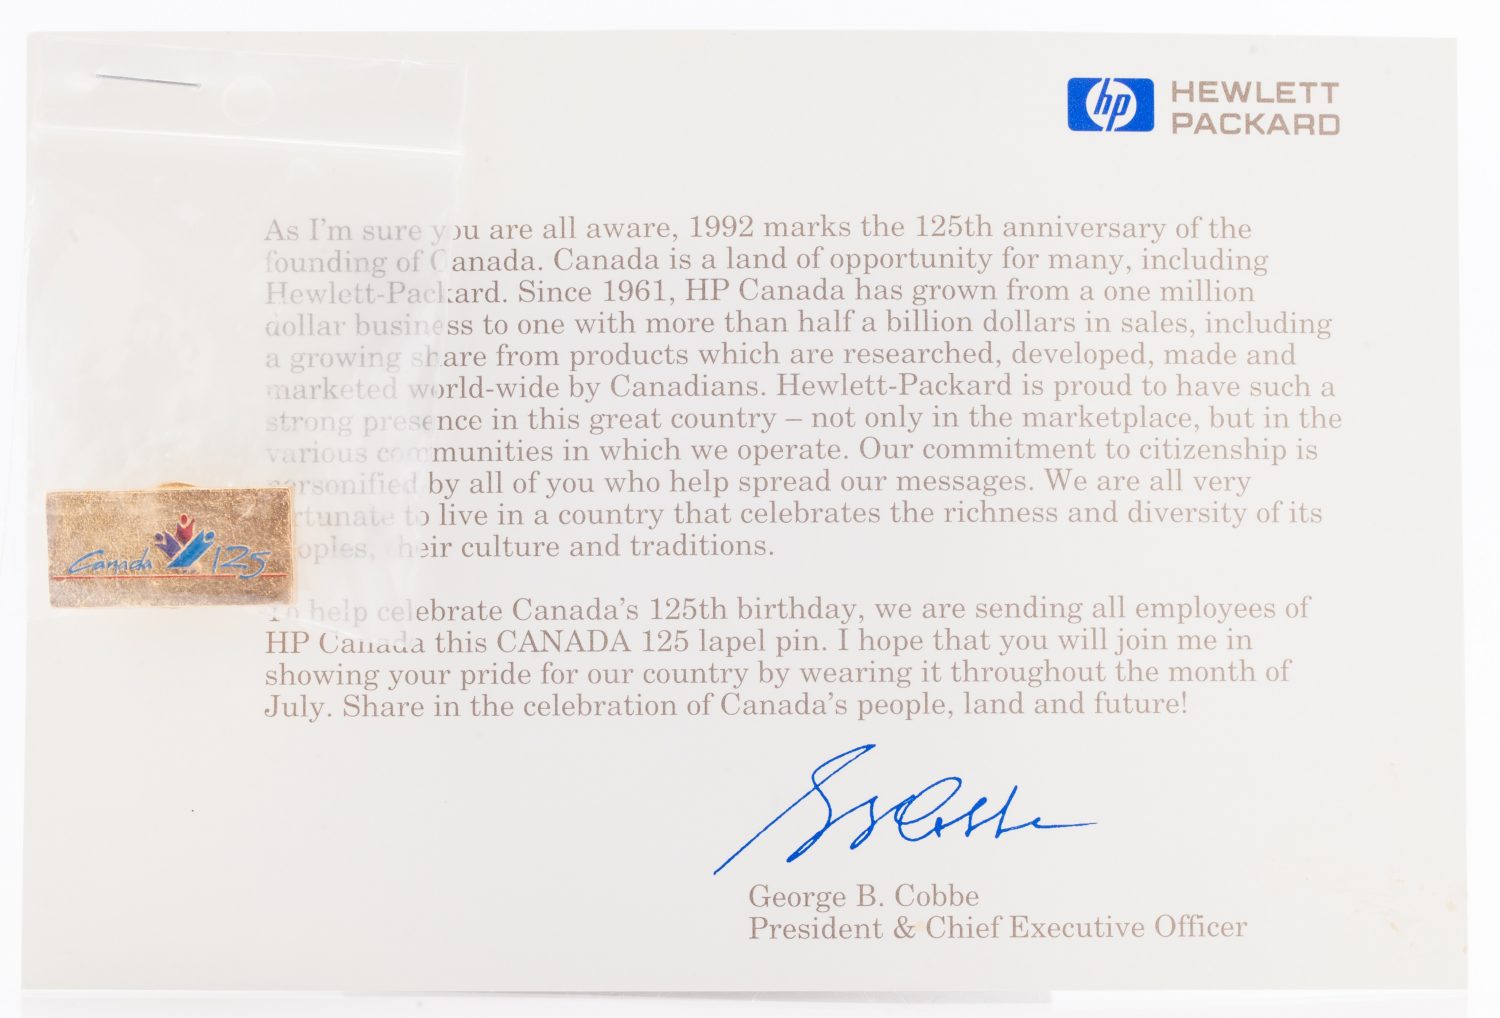 Letter from HP executive George Cobbe about Canada's 125th birthday with attached pin.